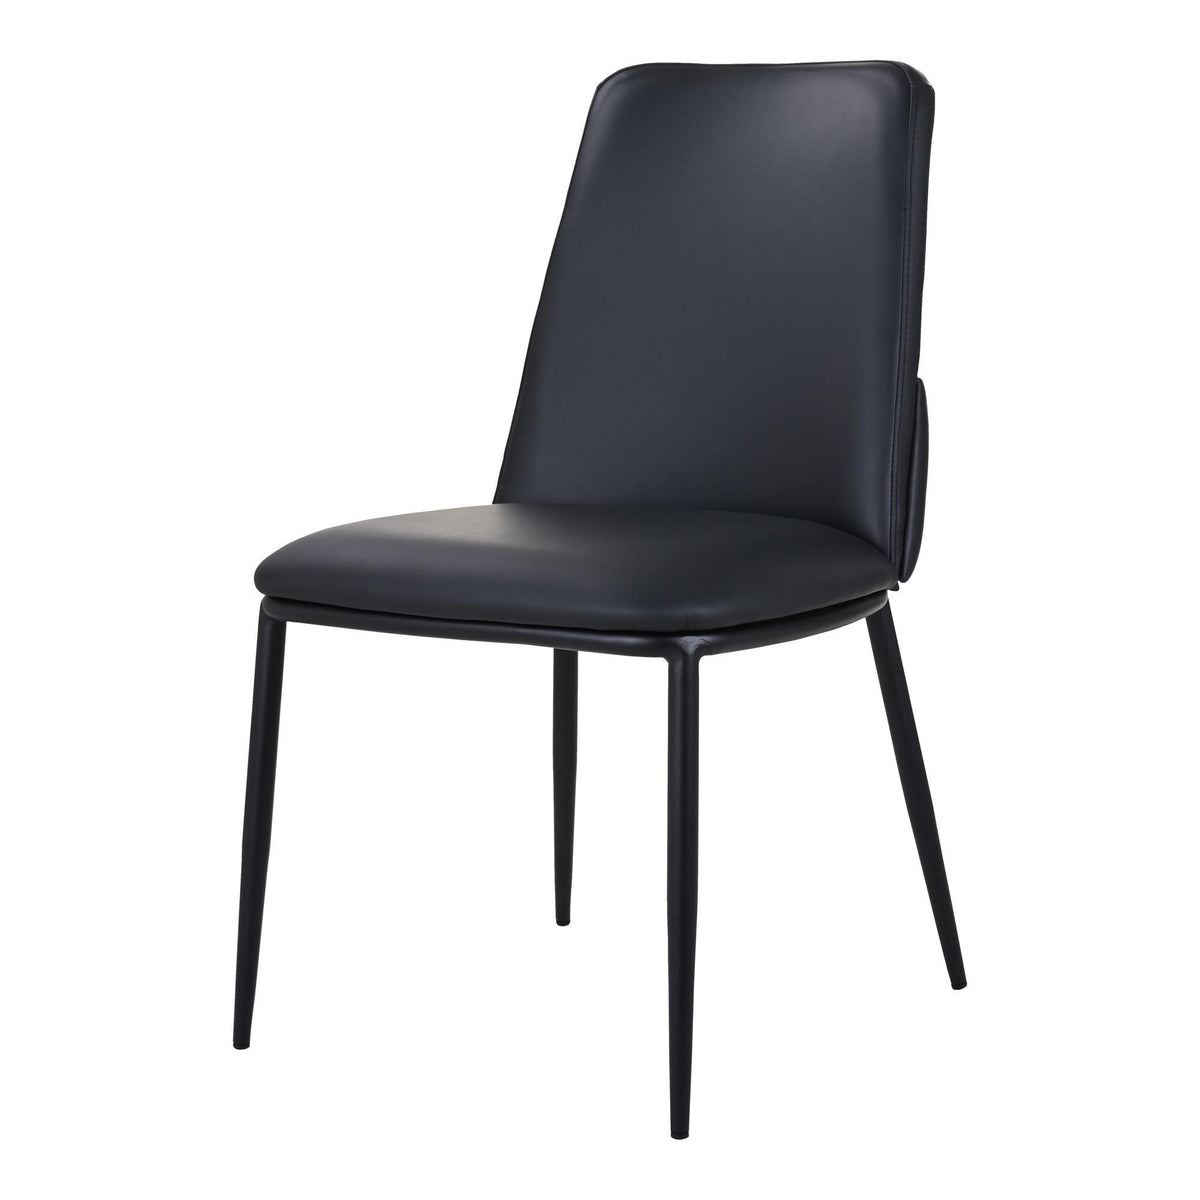 Moe's Home Collection Douglas Dining Chair Black - EQ-1017-02